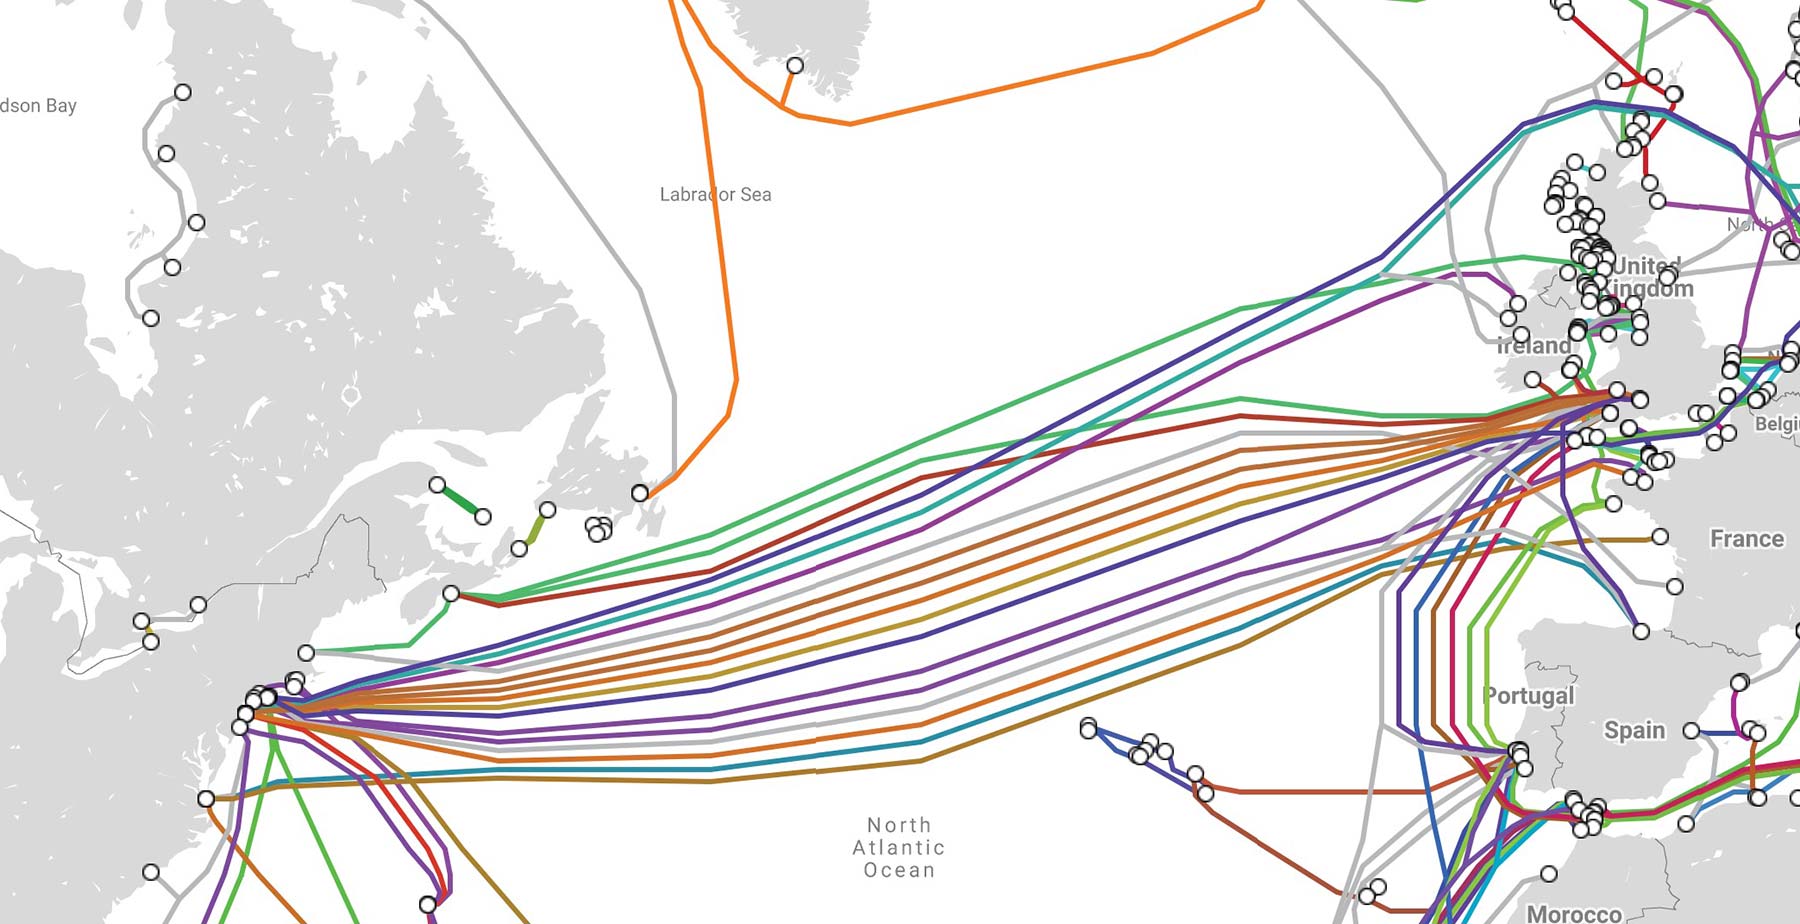 Europe-US-under-sea-cables.jpg